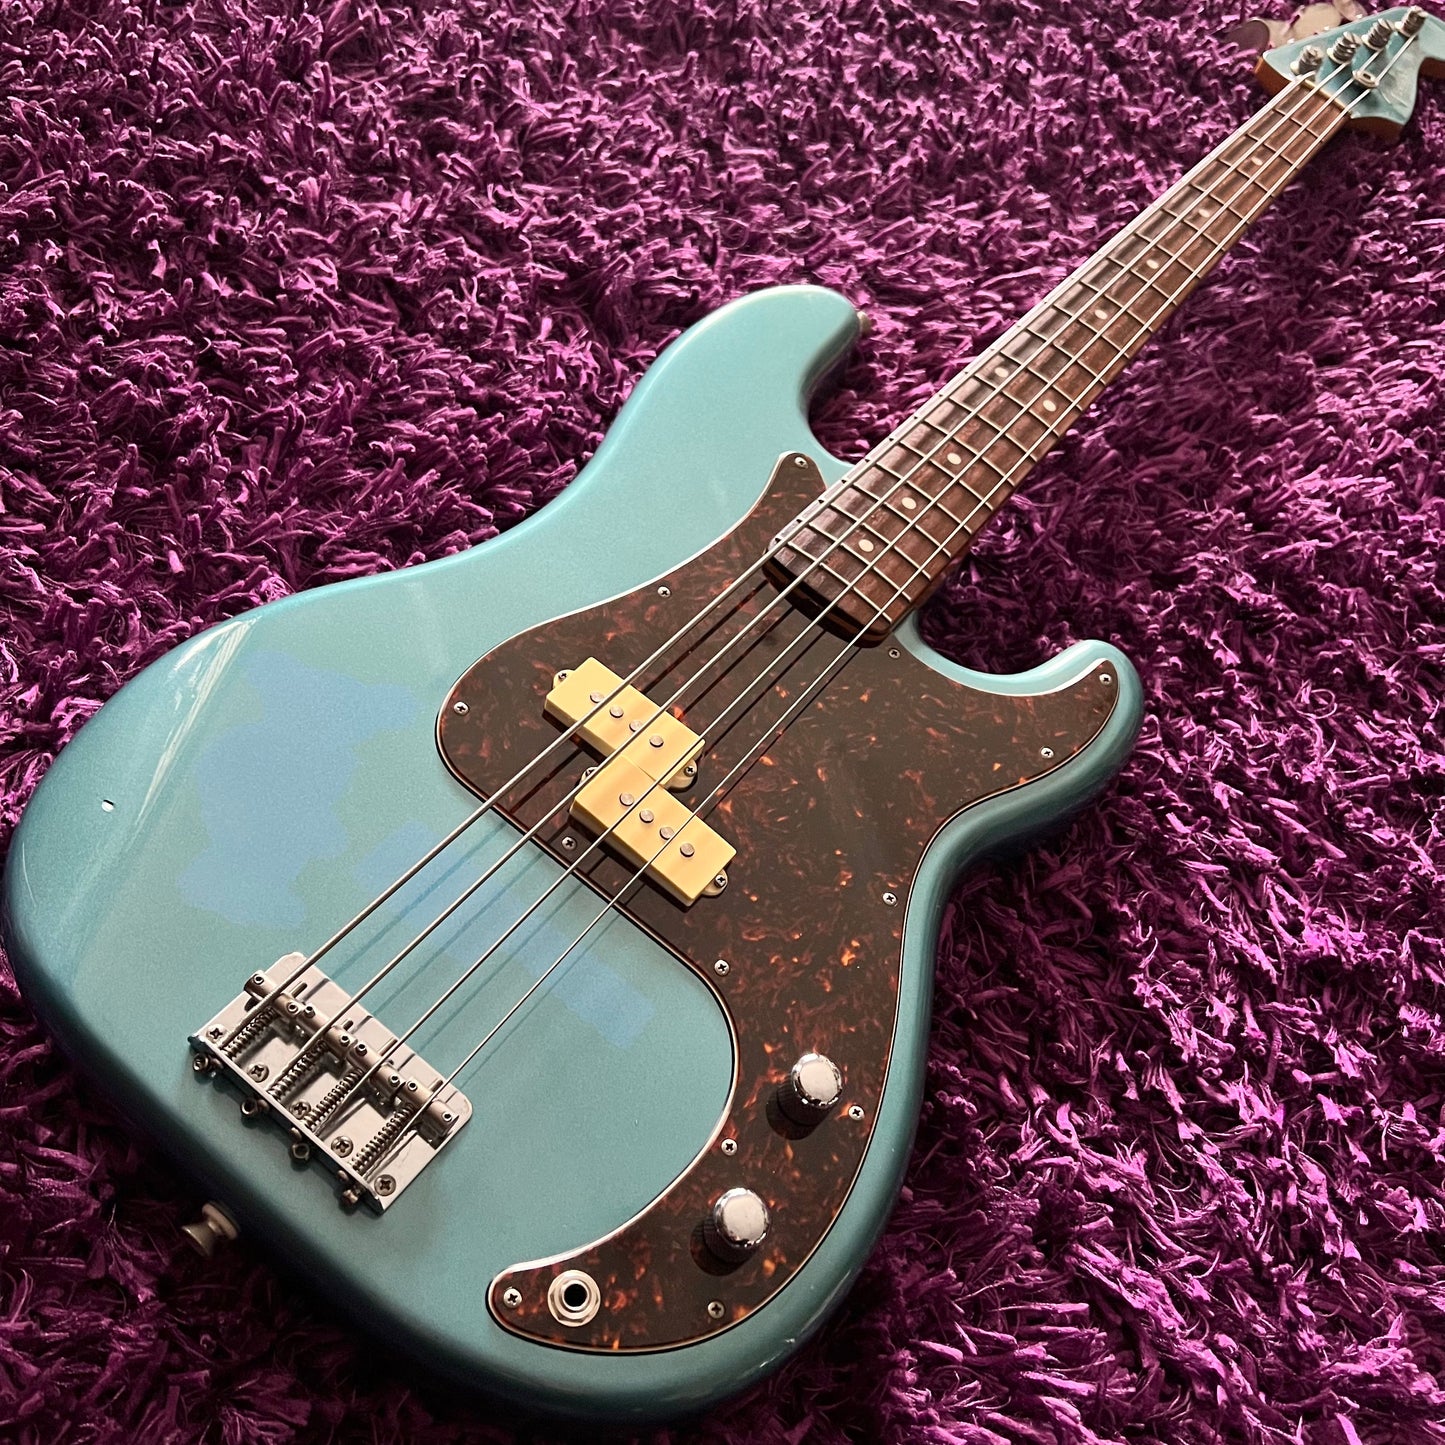 1993-94 Fender PB-62 Precision Bass Lake Placid Blue (Crafted in Japan)